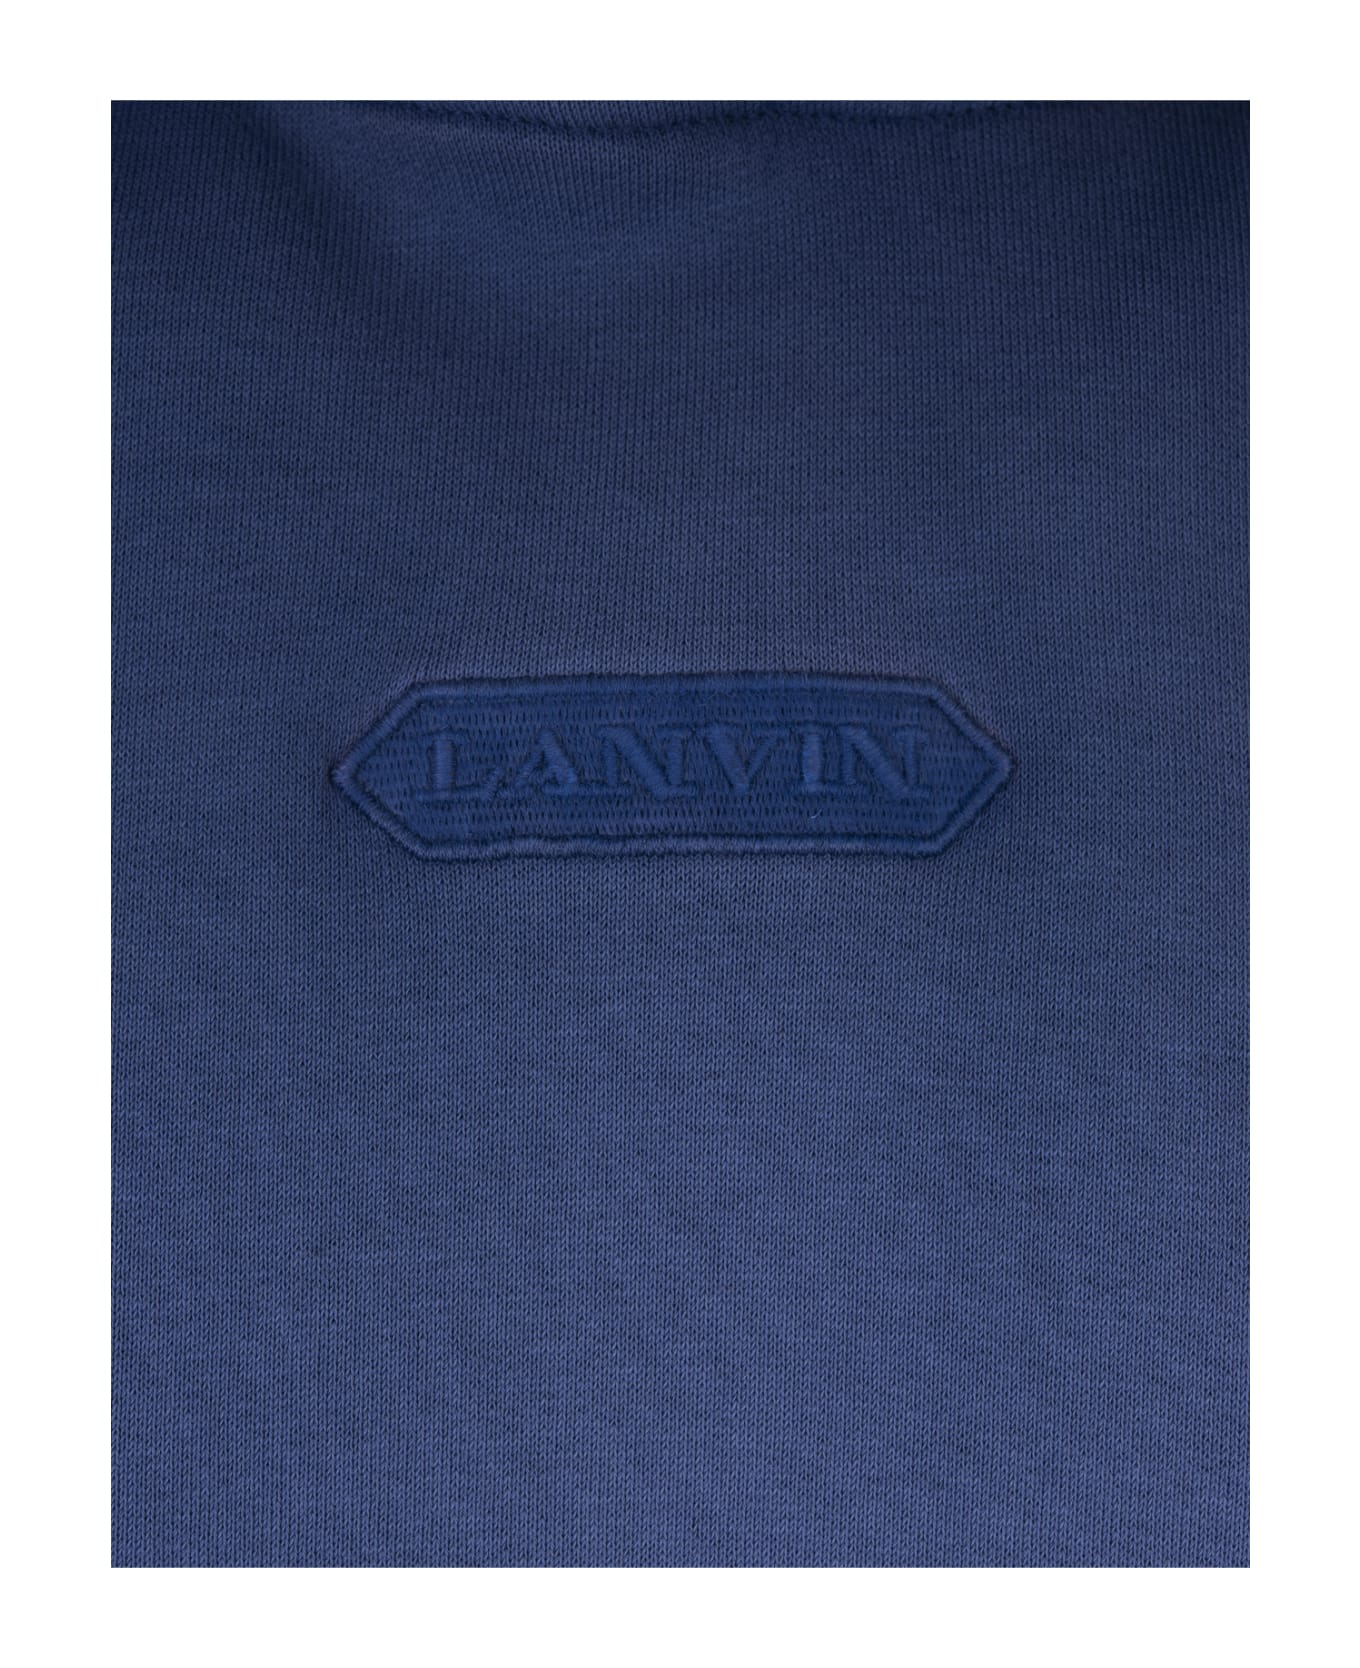 Lanvin Oversized Hoodie With A Gradient Effect - Blue フリース